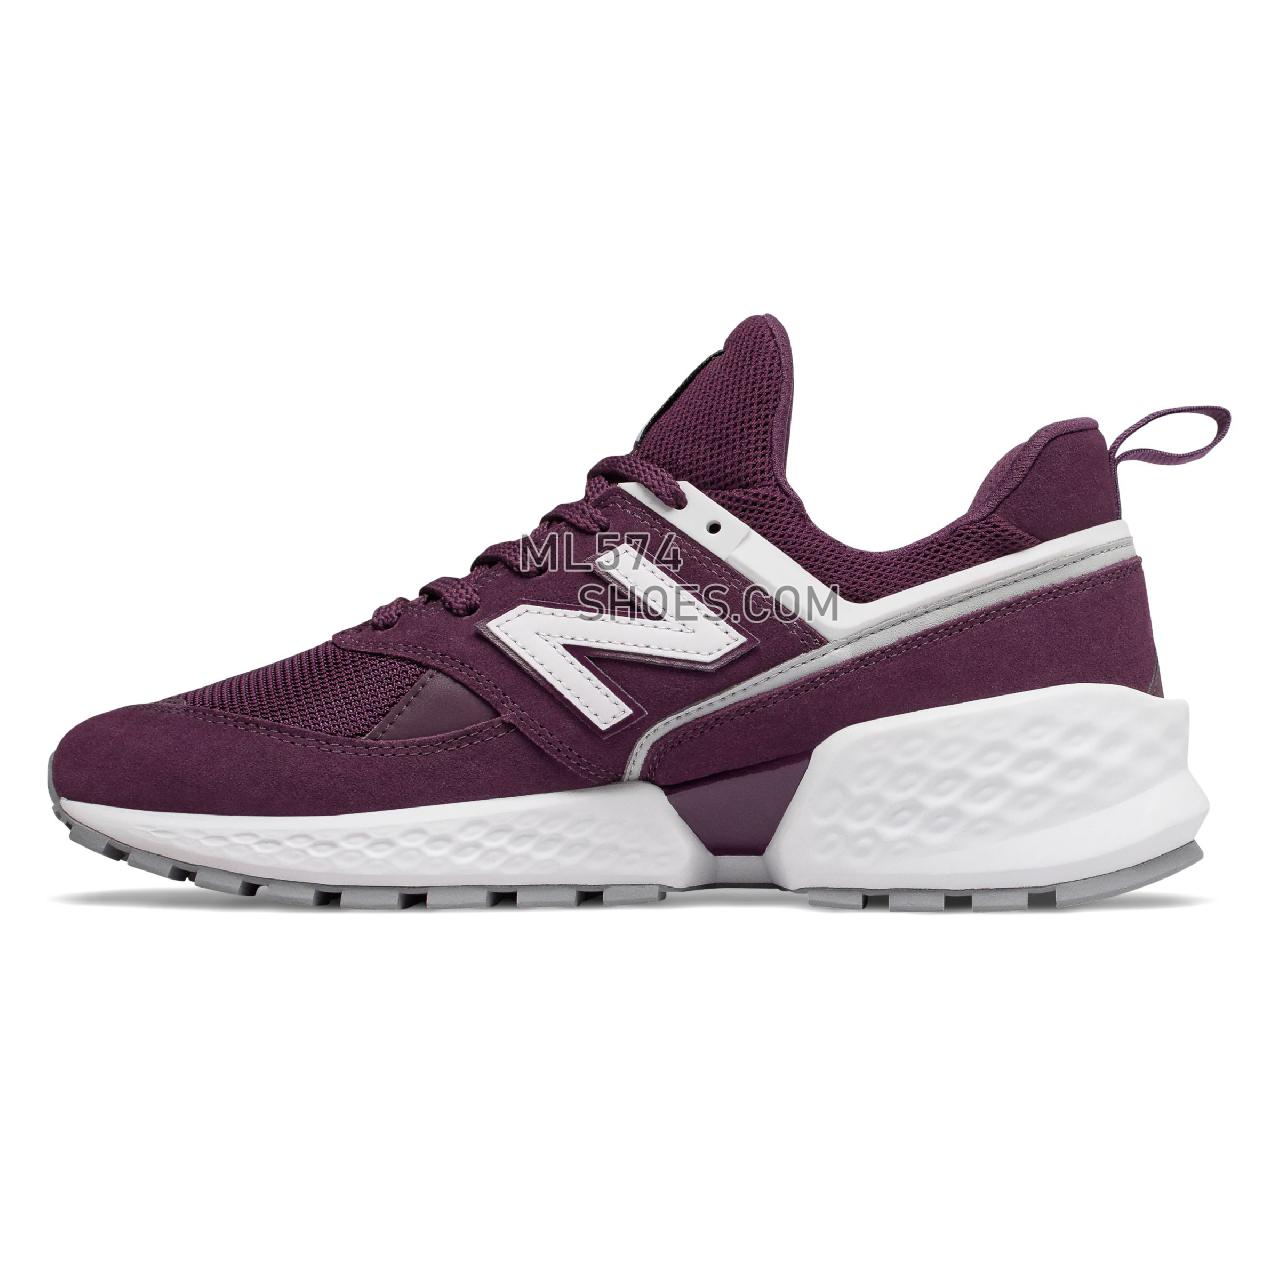 New Balance 574 Sport - Men's Sport Style Sneakers - Dark Currant with White - MS574NSC